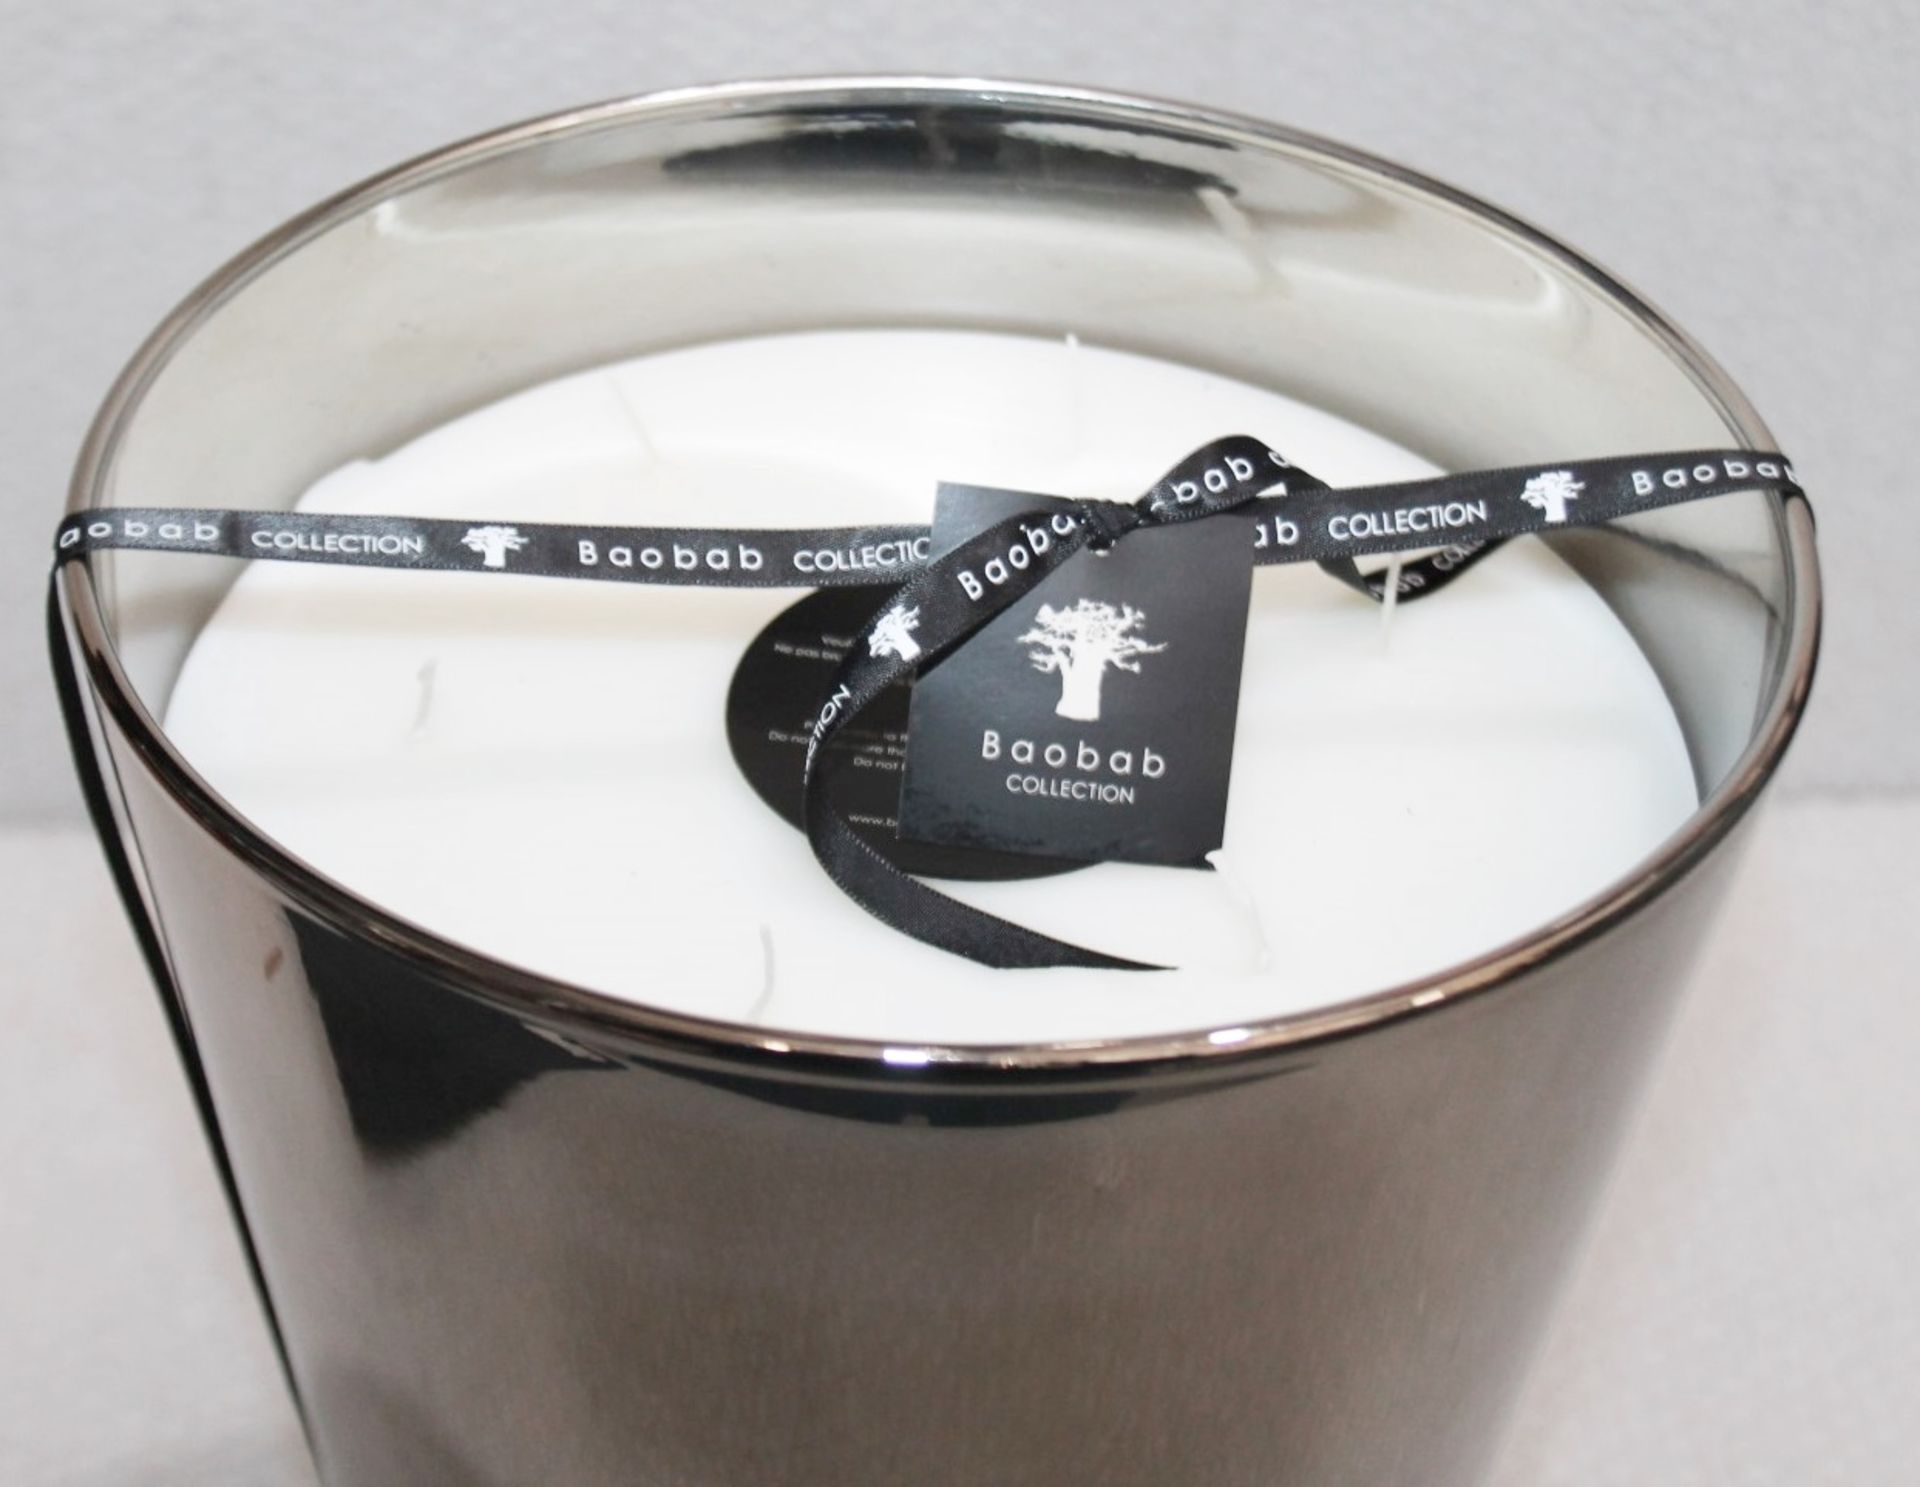 1 x BAOBAB COLLECTION Large 6.5kg 'Les Exclusives' Scented Candle (H35cm) - Original Price £465.00 - - Image 3 of 7